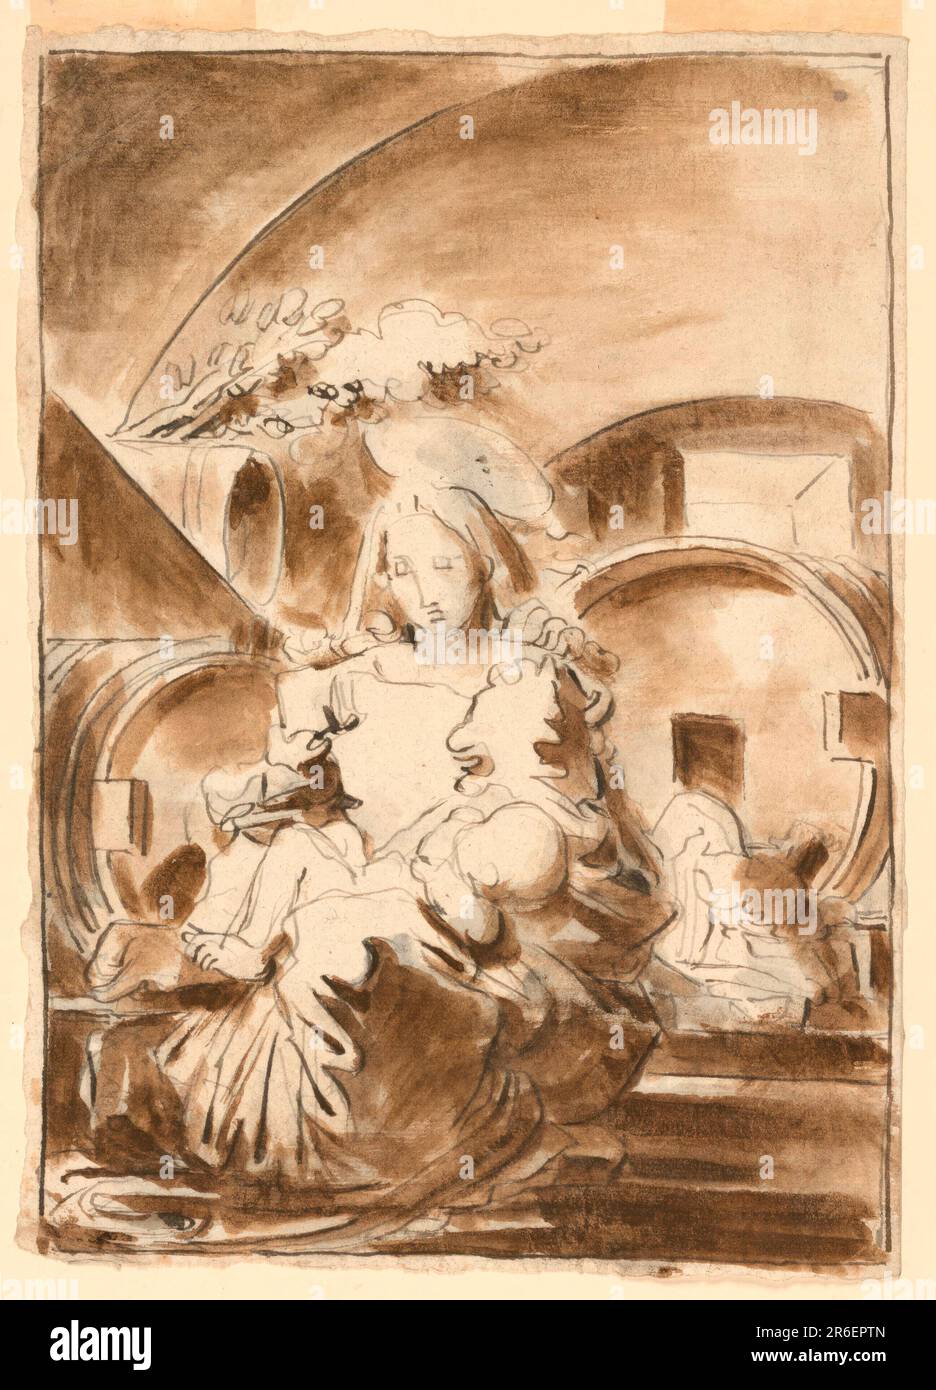 The Virgin sits at left, seen from the front, holding the Child in her lap. The scenery is a vaulted room. Joseph near two large logs. At left is apparently a smaller one and the branch of a tree. Framing line. Date: 1820-1850. Brush and dark brown watercolor on paper. Museum: Cooper Hewitt, Smithsonian Design Museum. Stock Photo